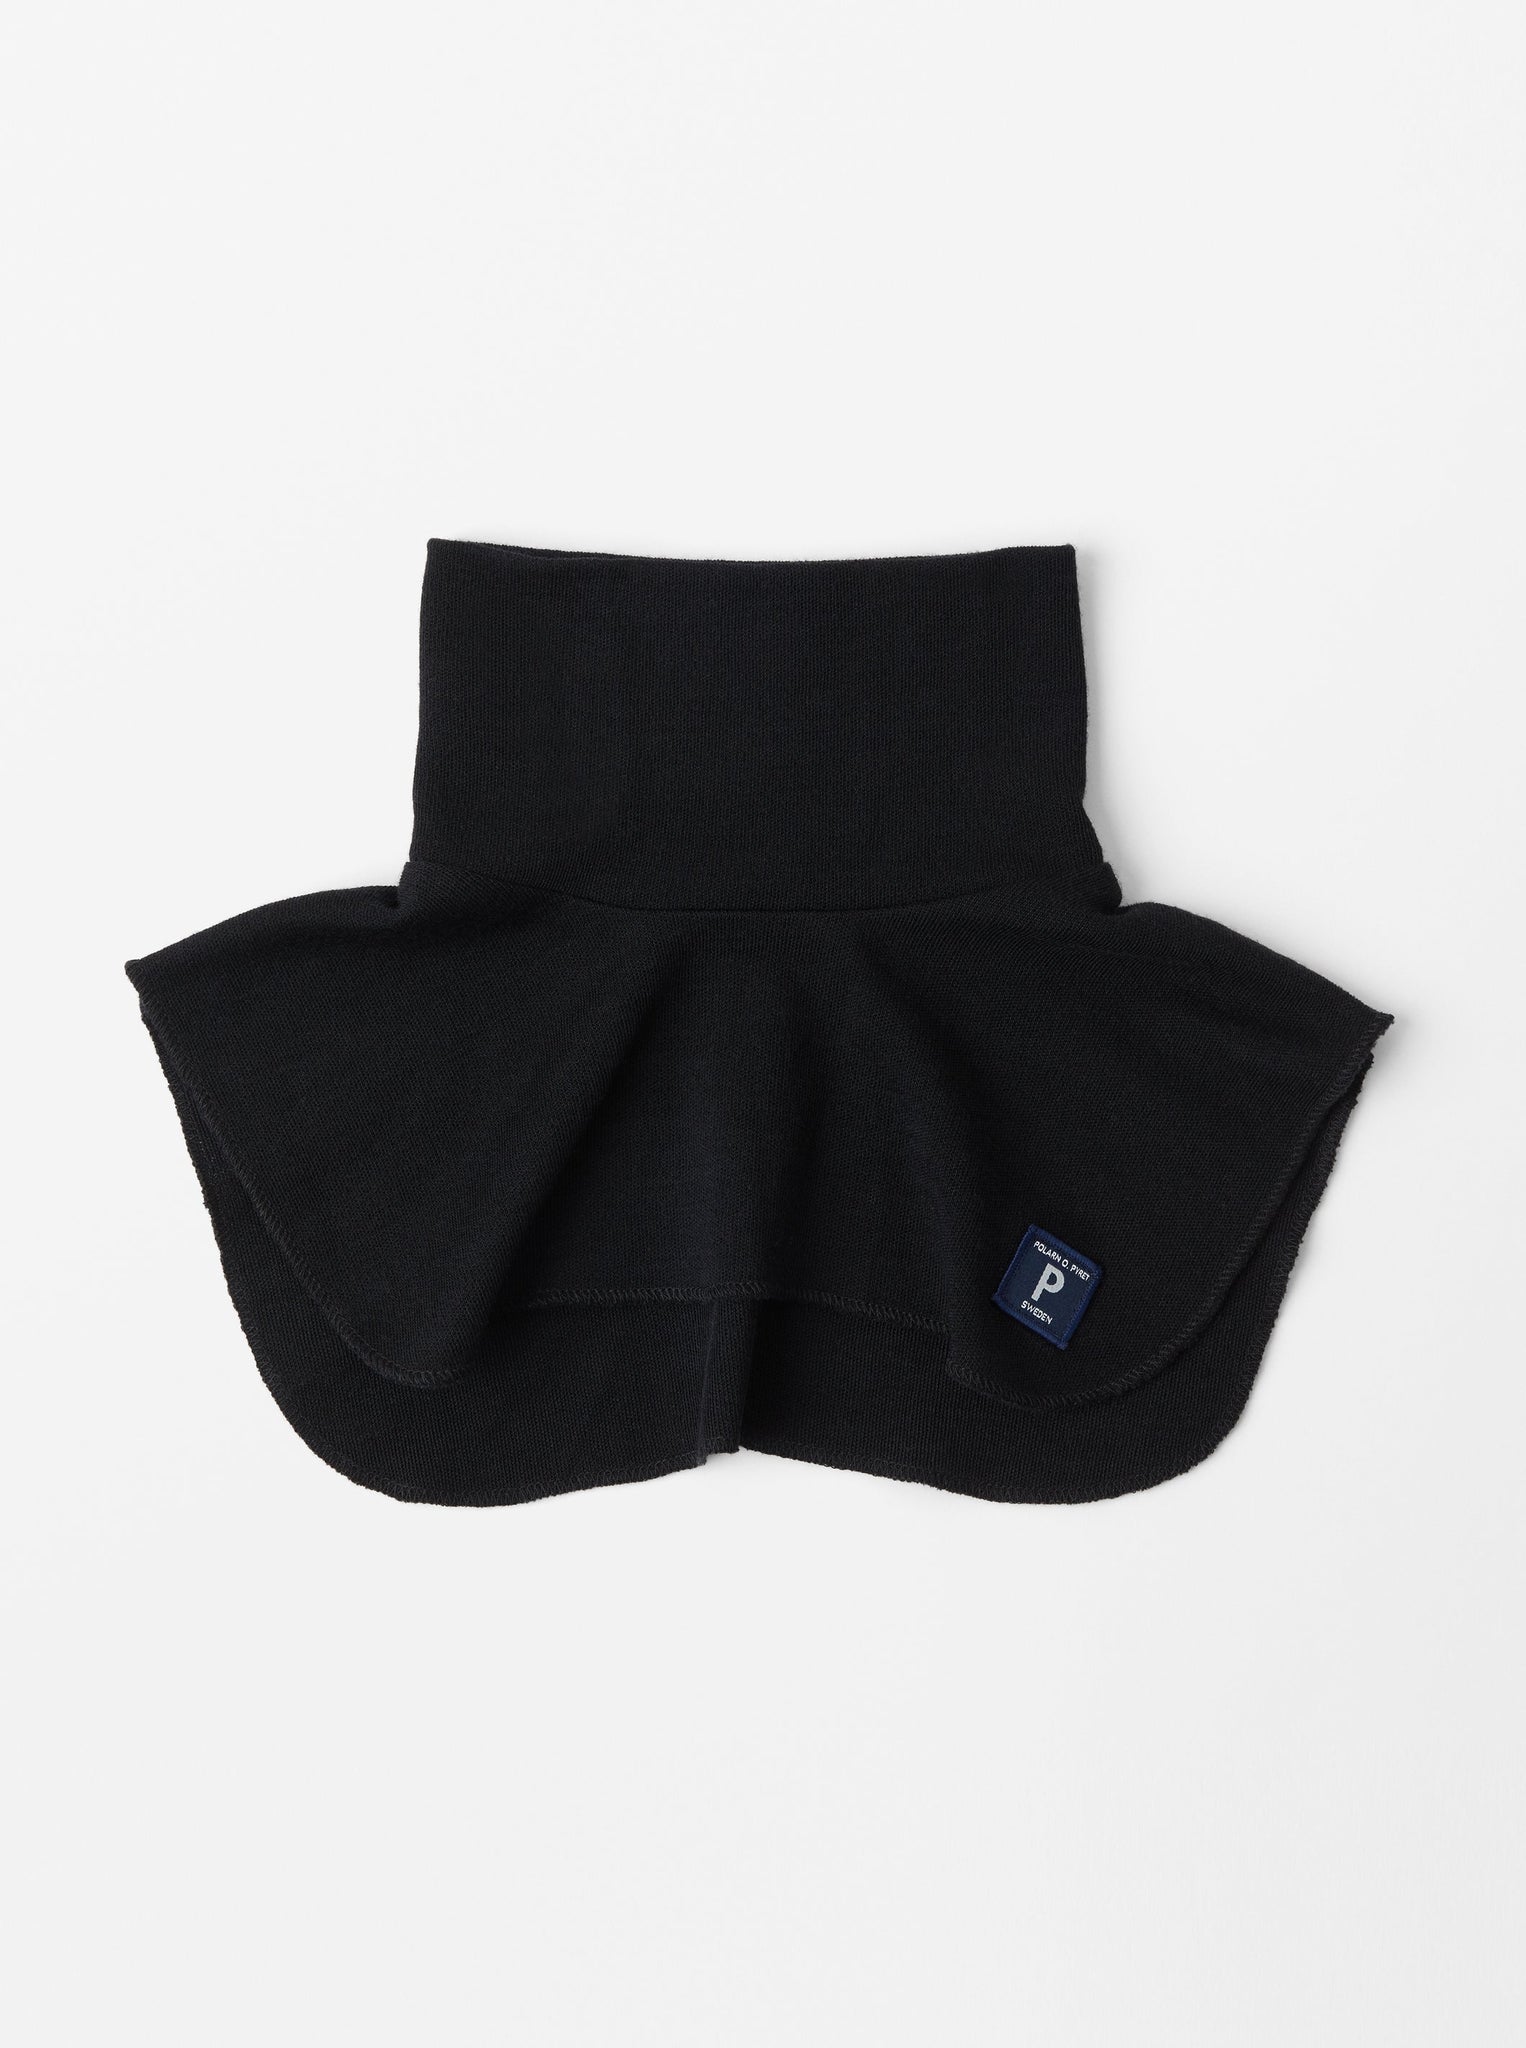 Black Merino Wool Kids Snood from the Polarn O. Pyret kidswear collection. Quality kids clothing made to last.